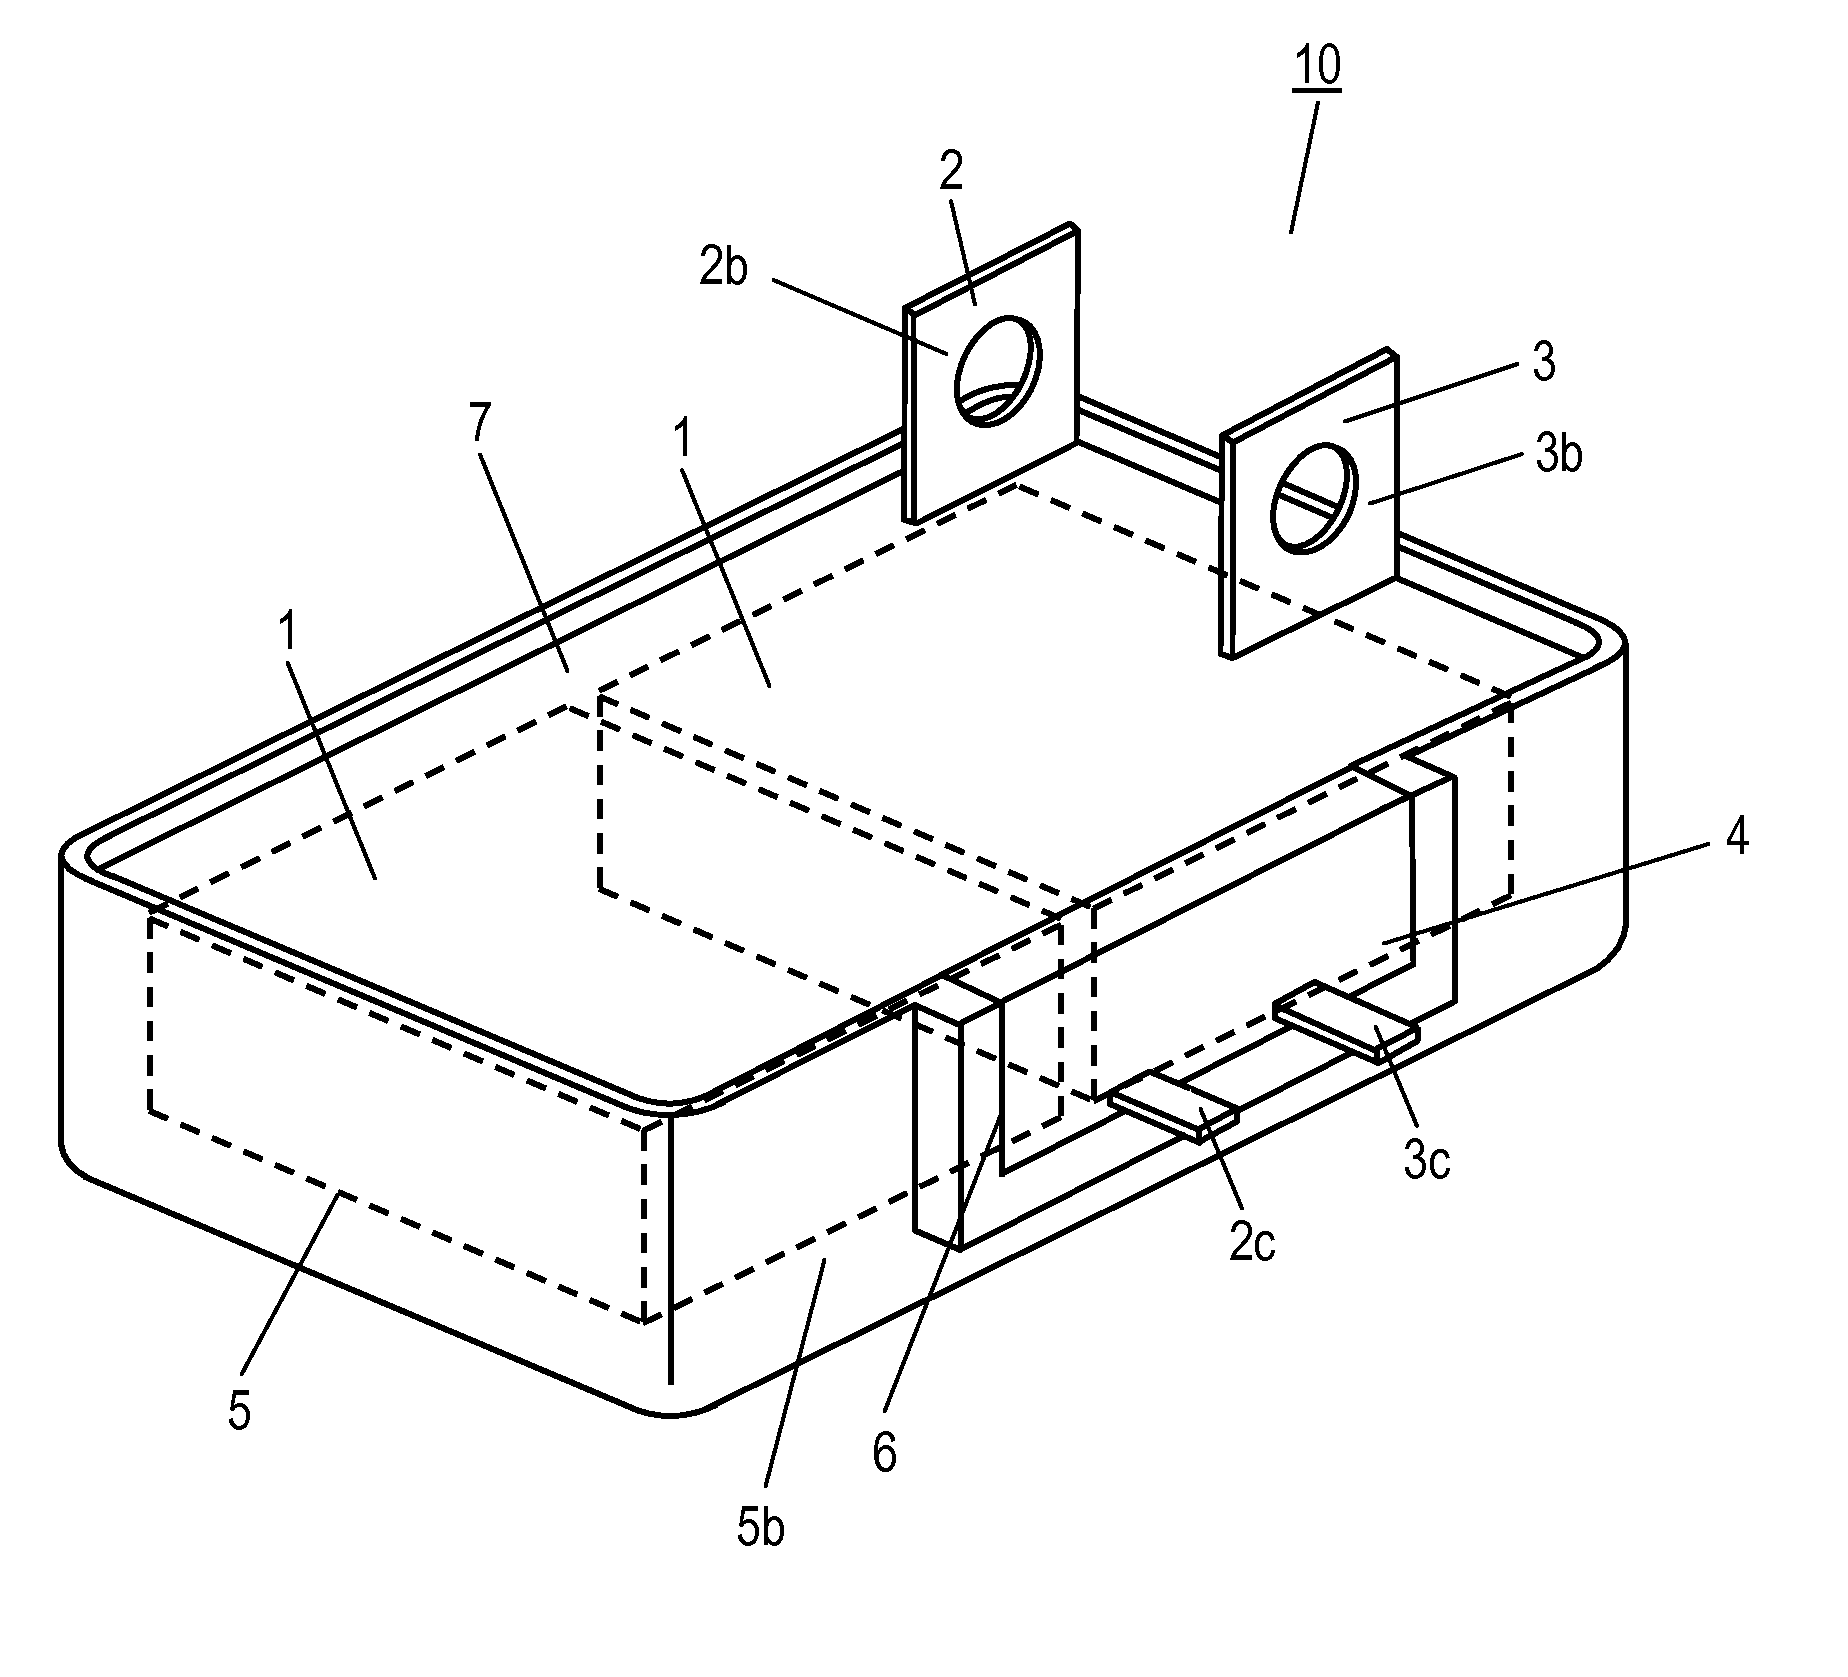 Case-mold-type capacitor and method for producing same